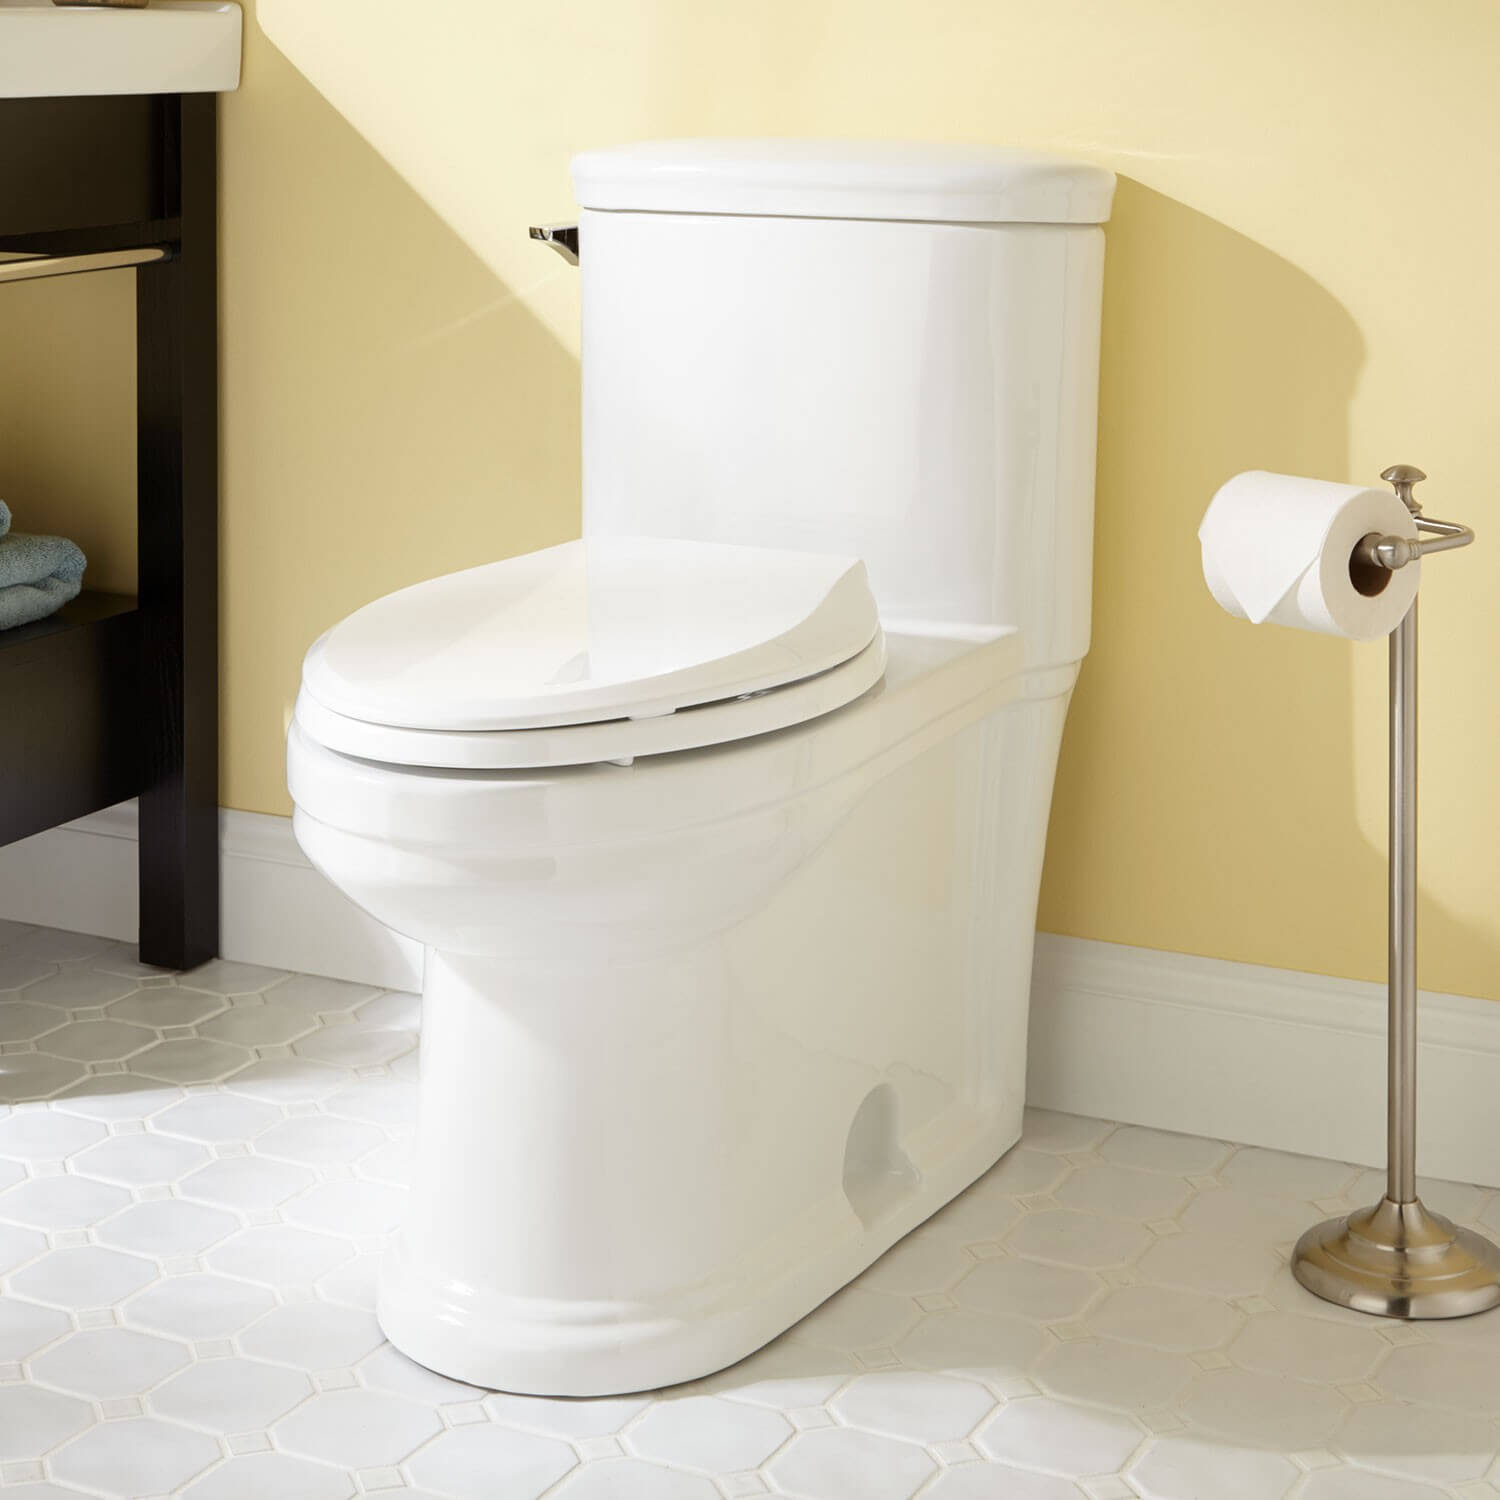 Game of Thrones: Your Guide to Finding the Best Toilet - One-Piece Toilet